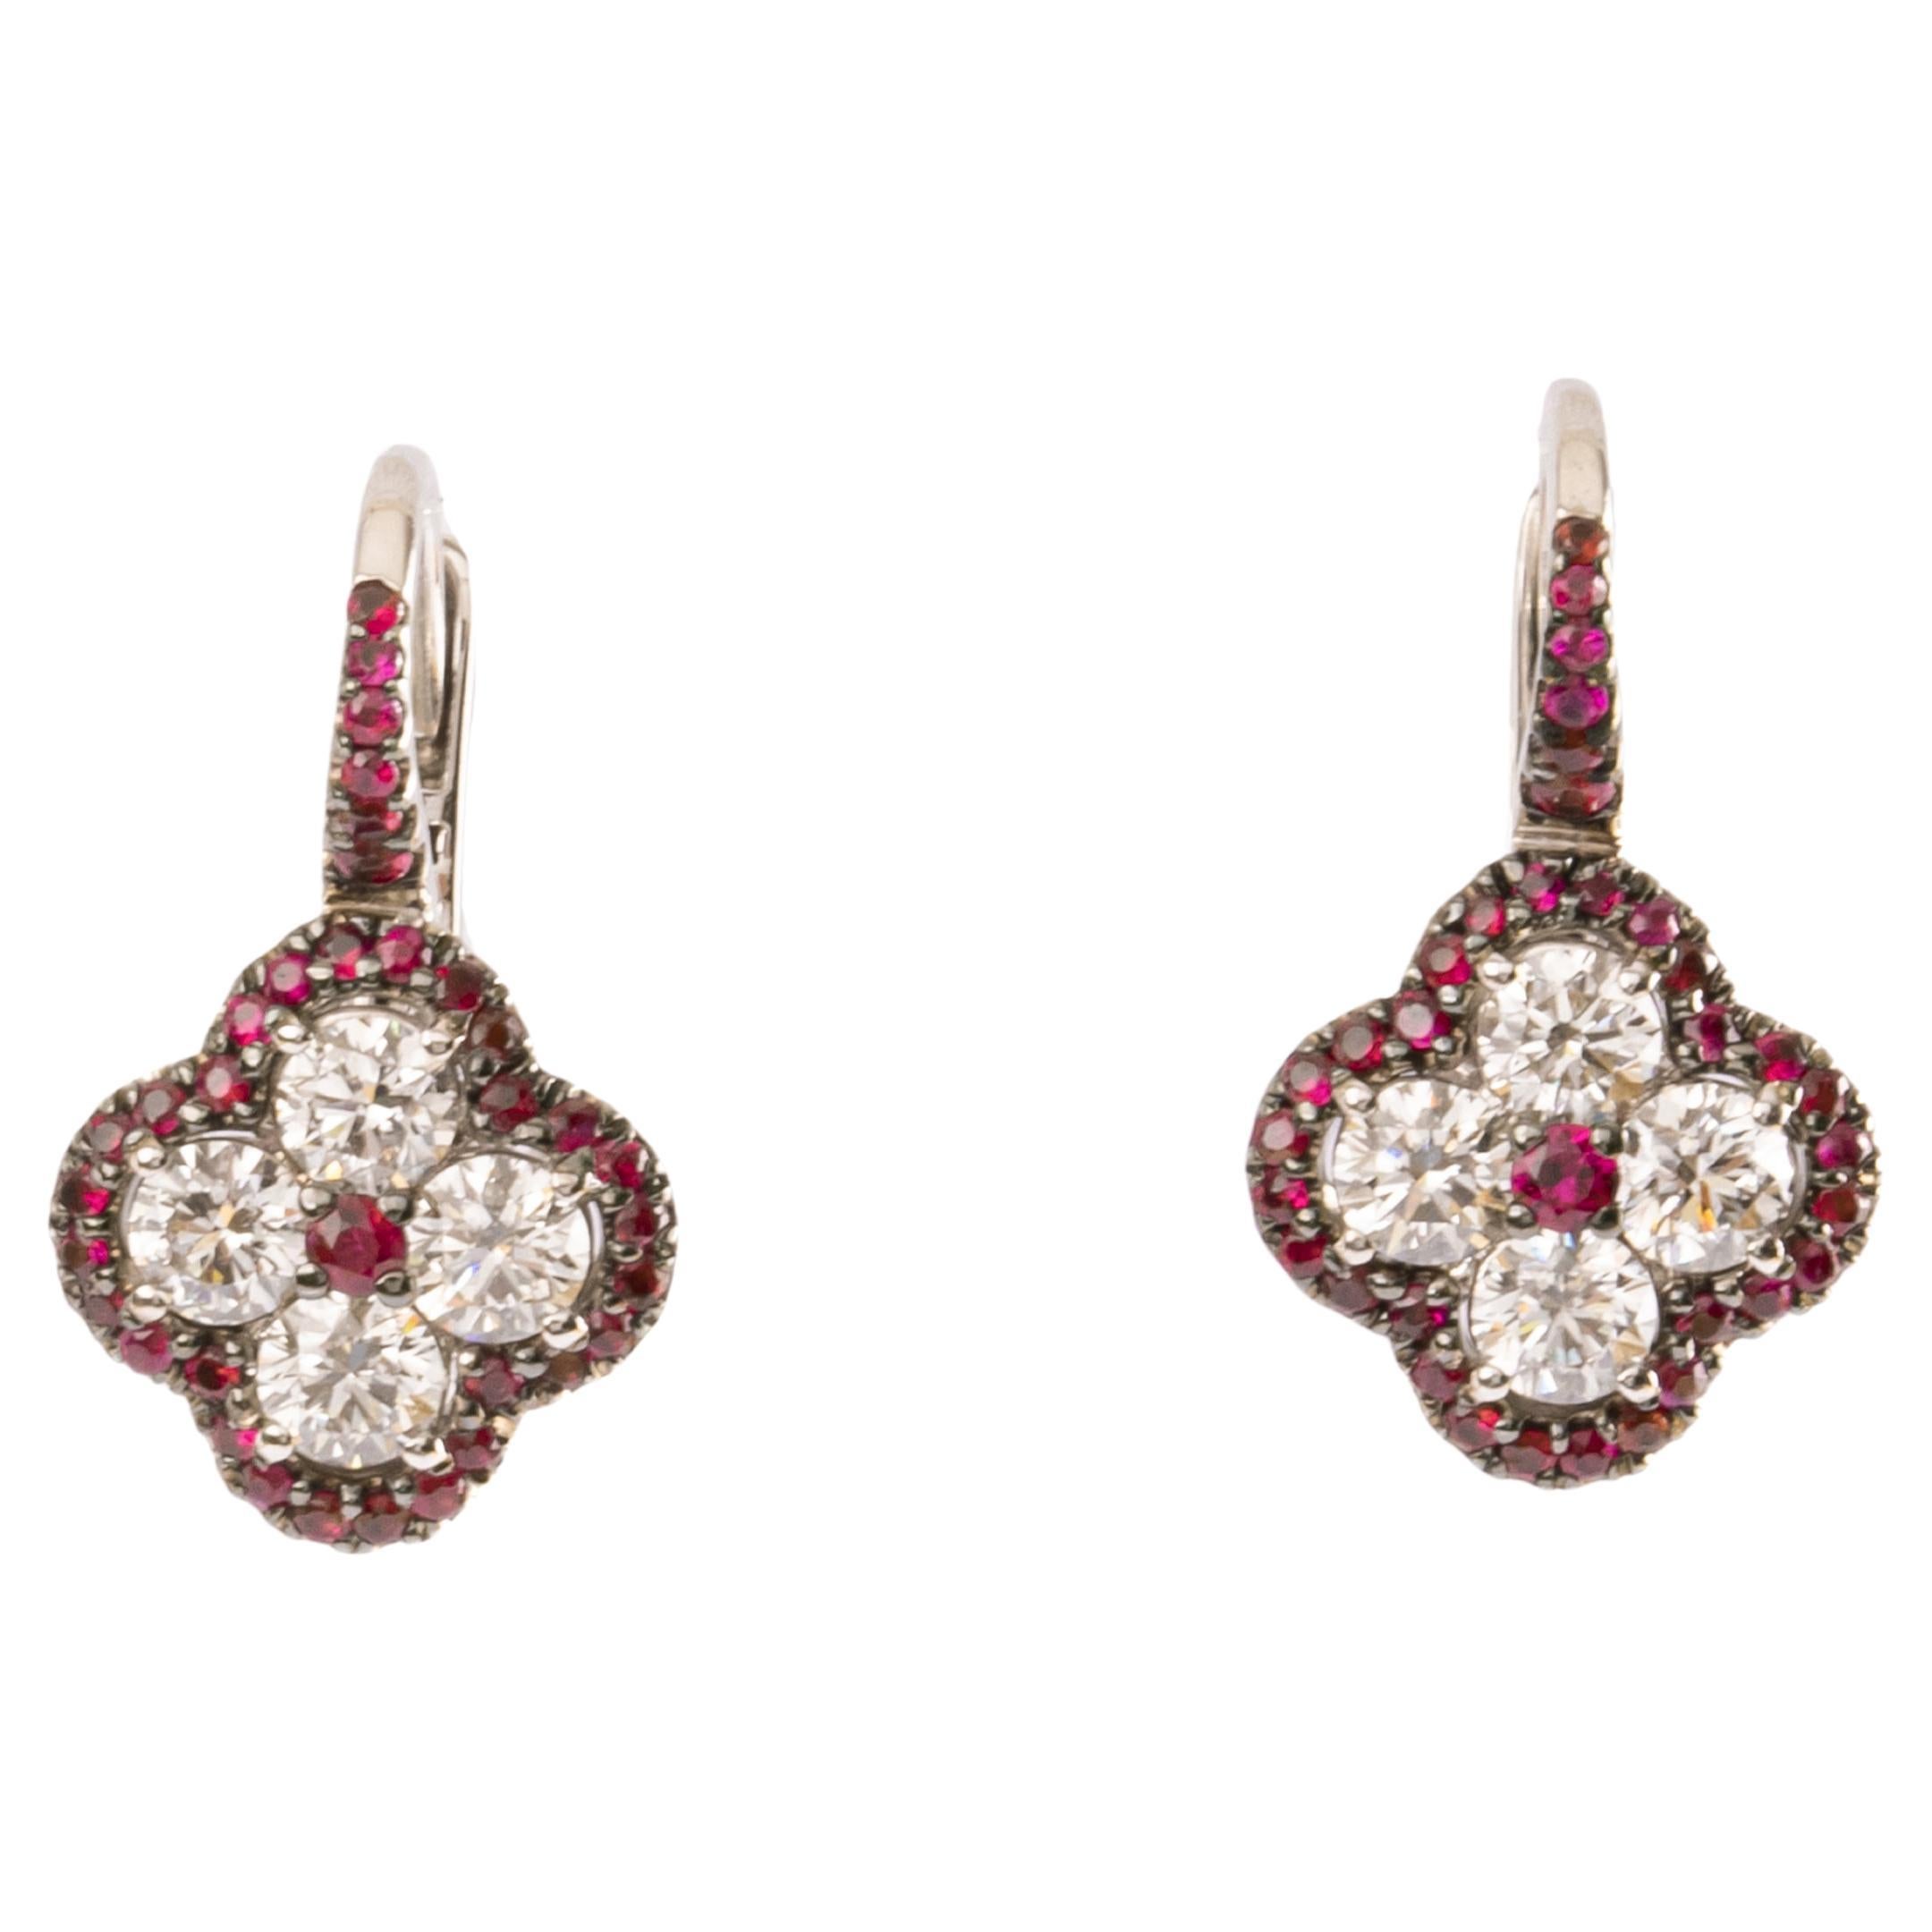 Crivelli Four-Leaf Clover White Gold Brilliant and Rubies Earrings For Sale